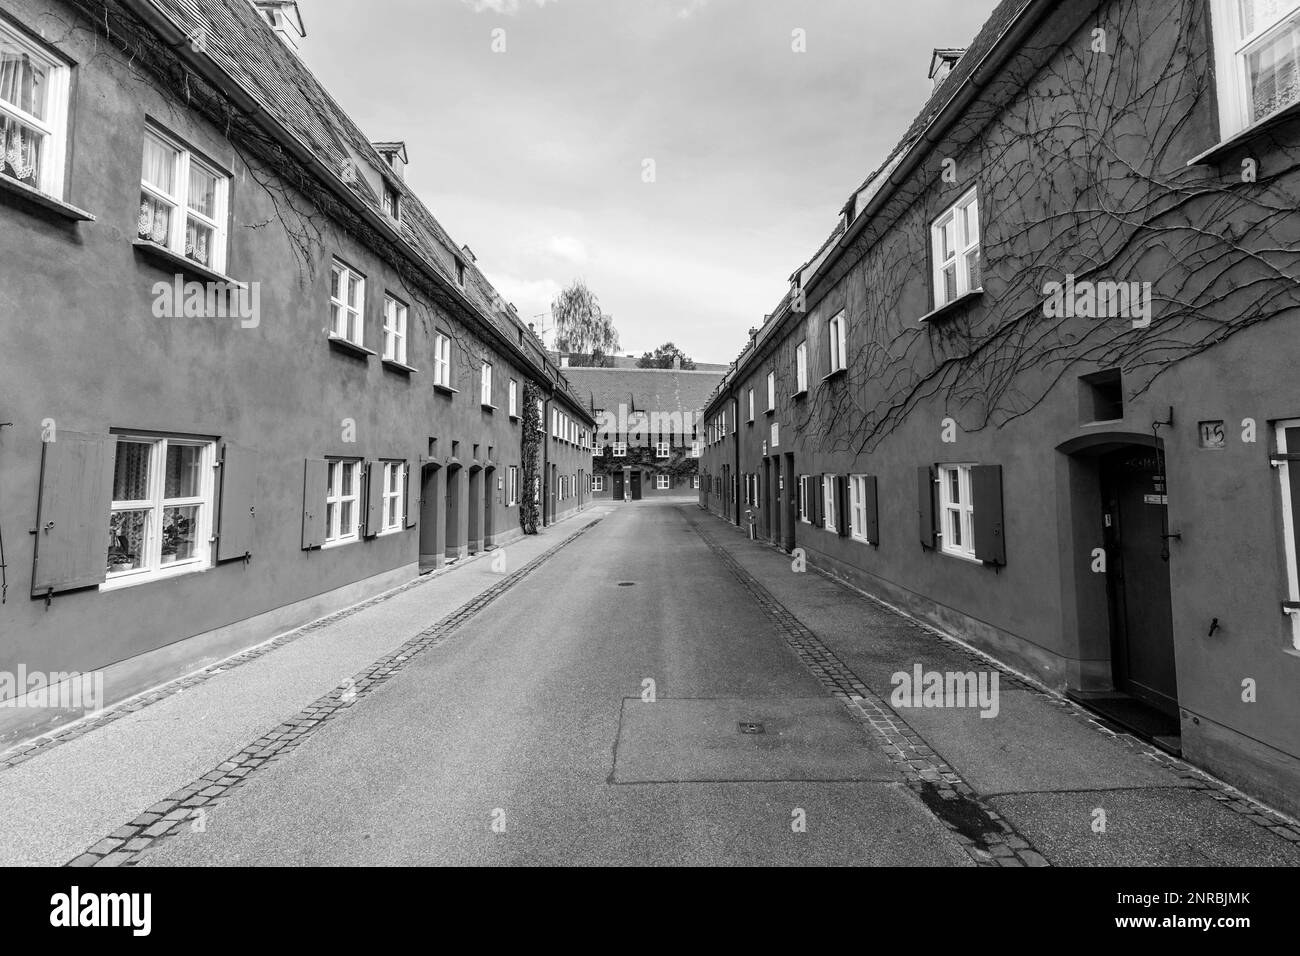 AUGSBURG, GERMANY - APRIL 29, 2015: The Fuggerei is the worlds oldest social housing complex still in use in Augsburg, Germany. Stock Photo